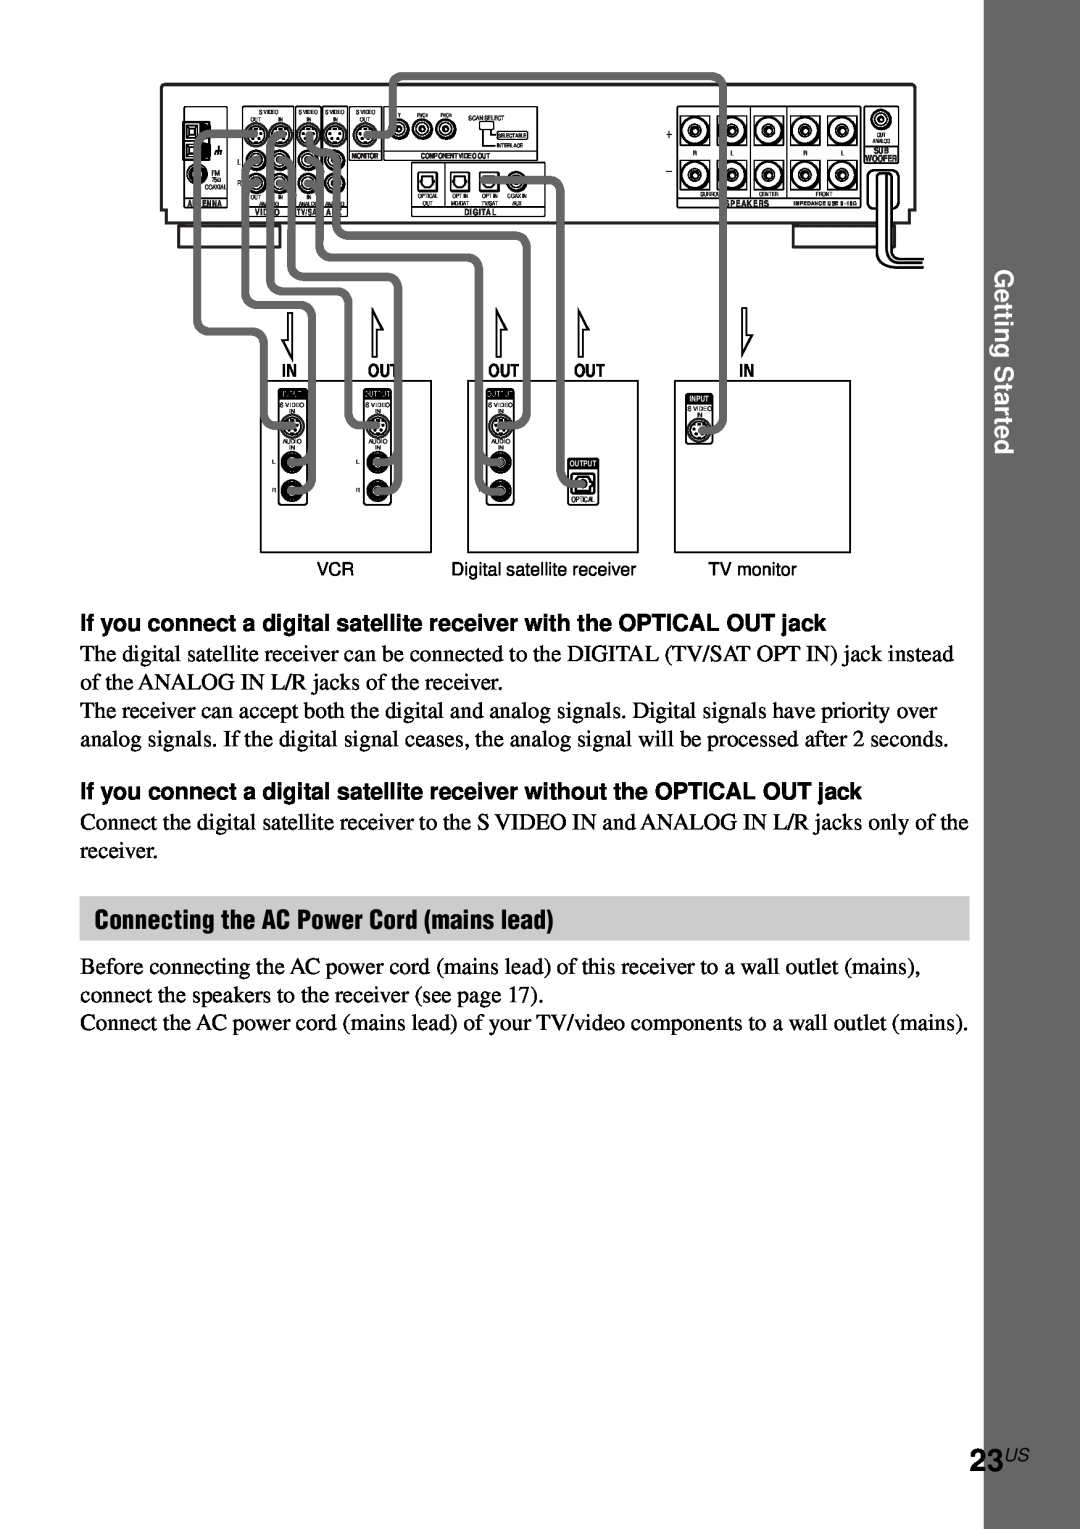 Sony AVD-S50ES operating instructions 23US, Connecting the AC Power Cord mains lead, Getting Started 